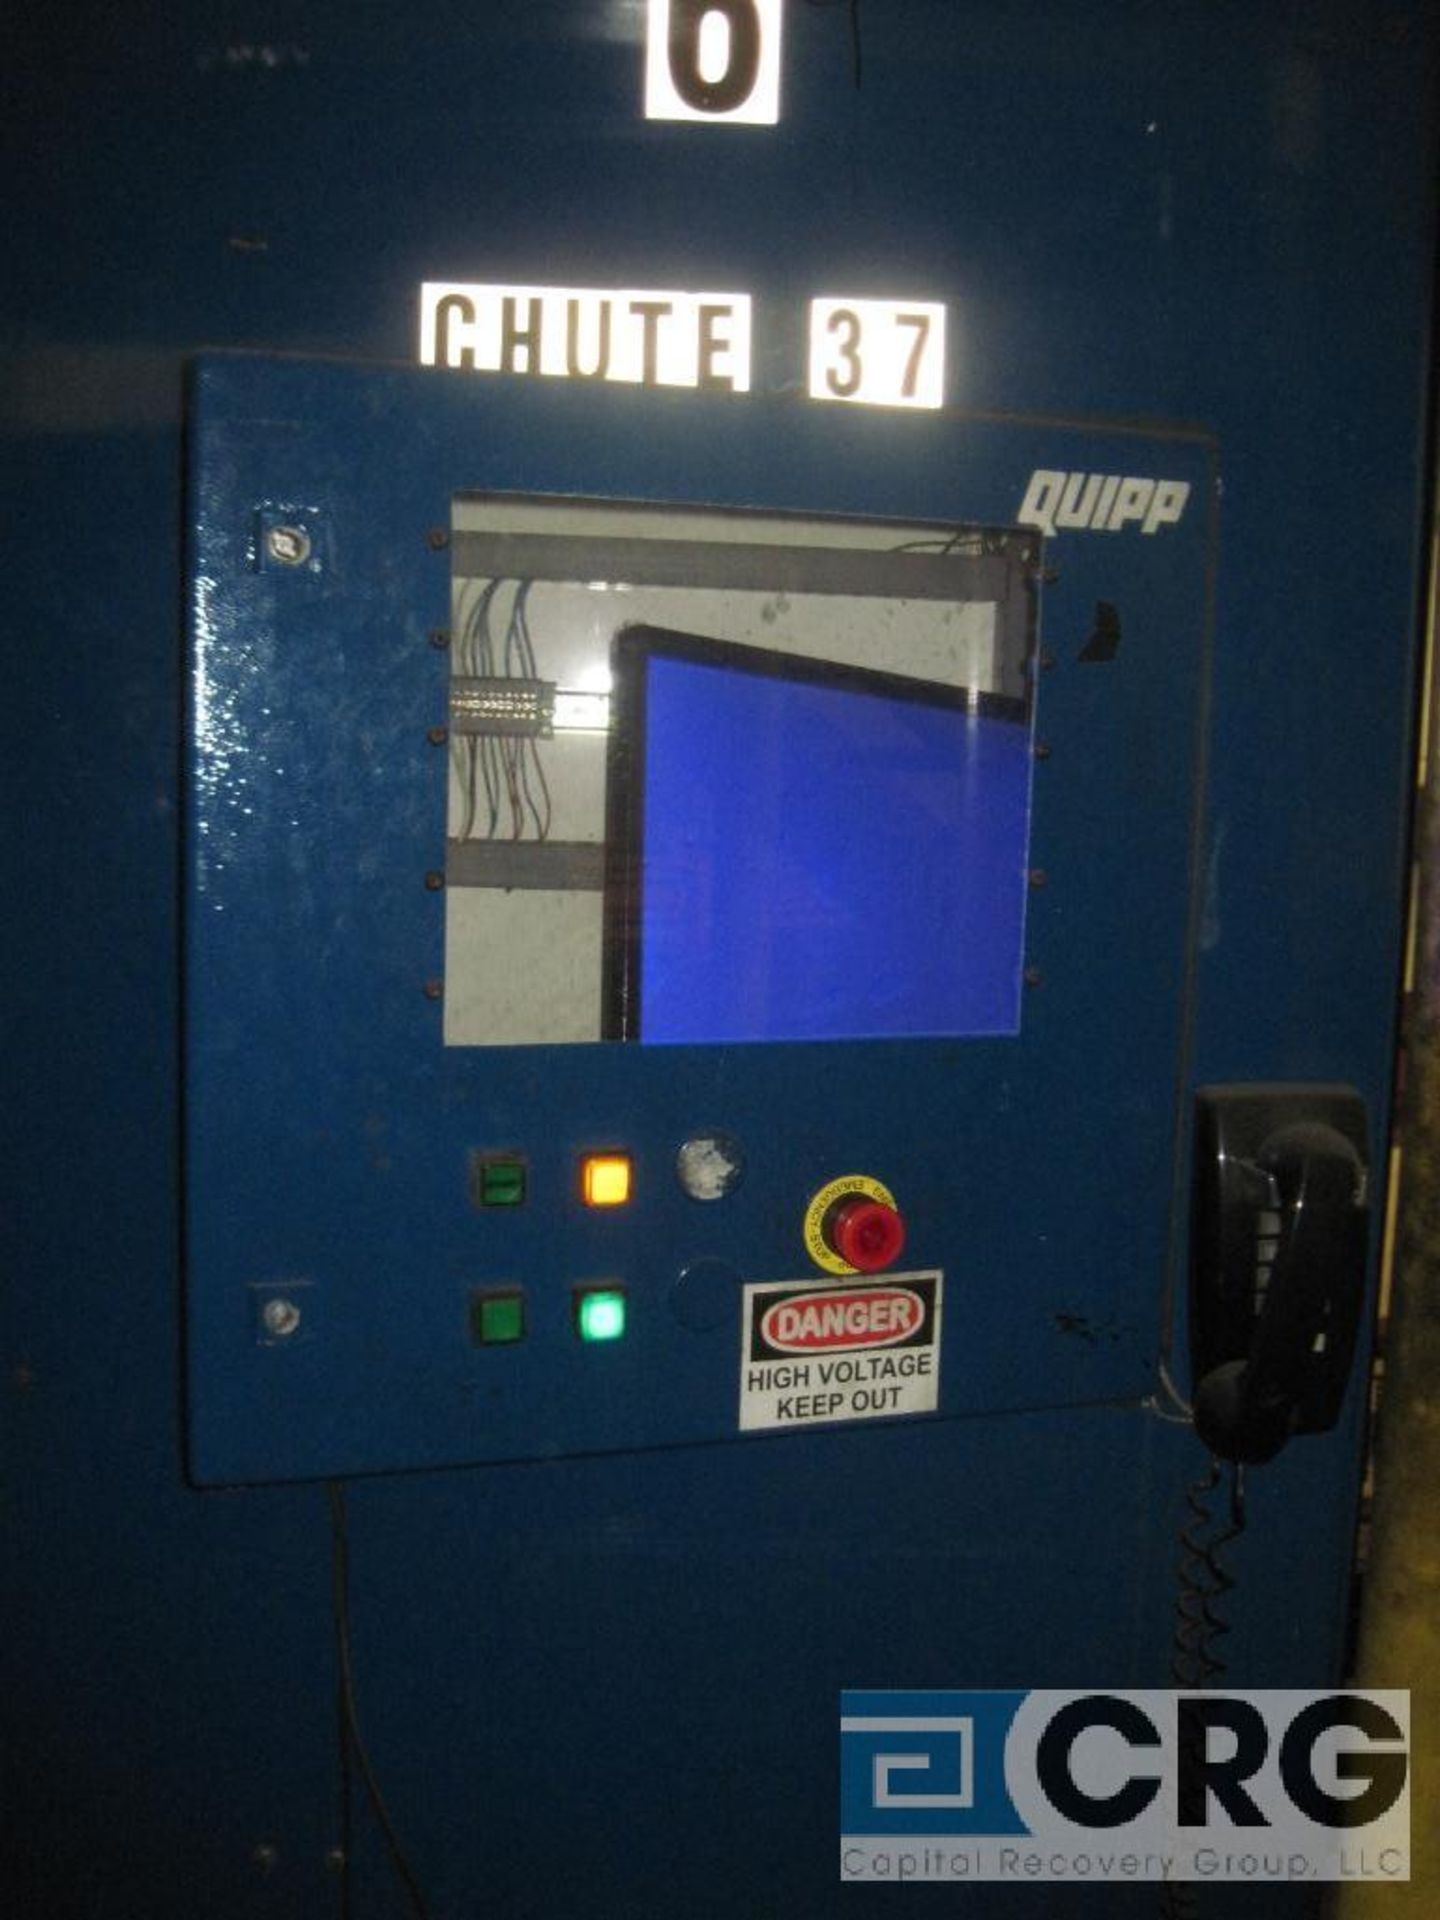 2004 Quipp automatic newspaper palletizer with PLC controls - Image 4 of 5